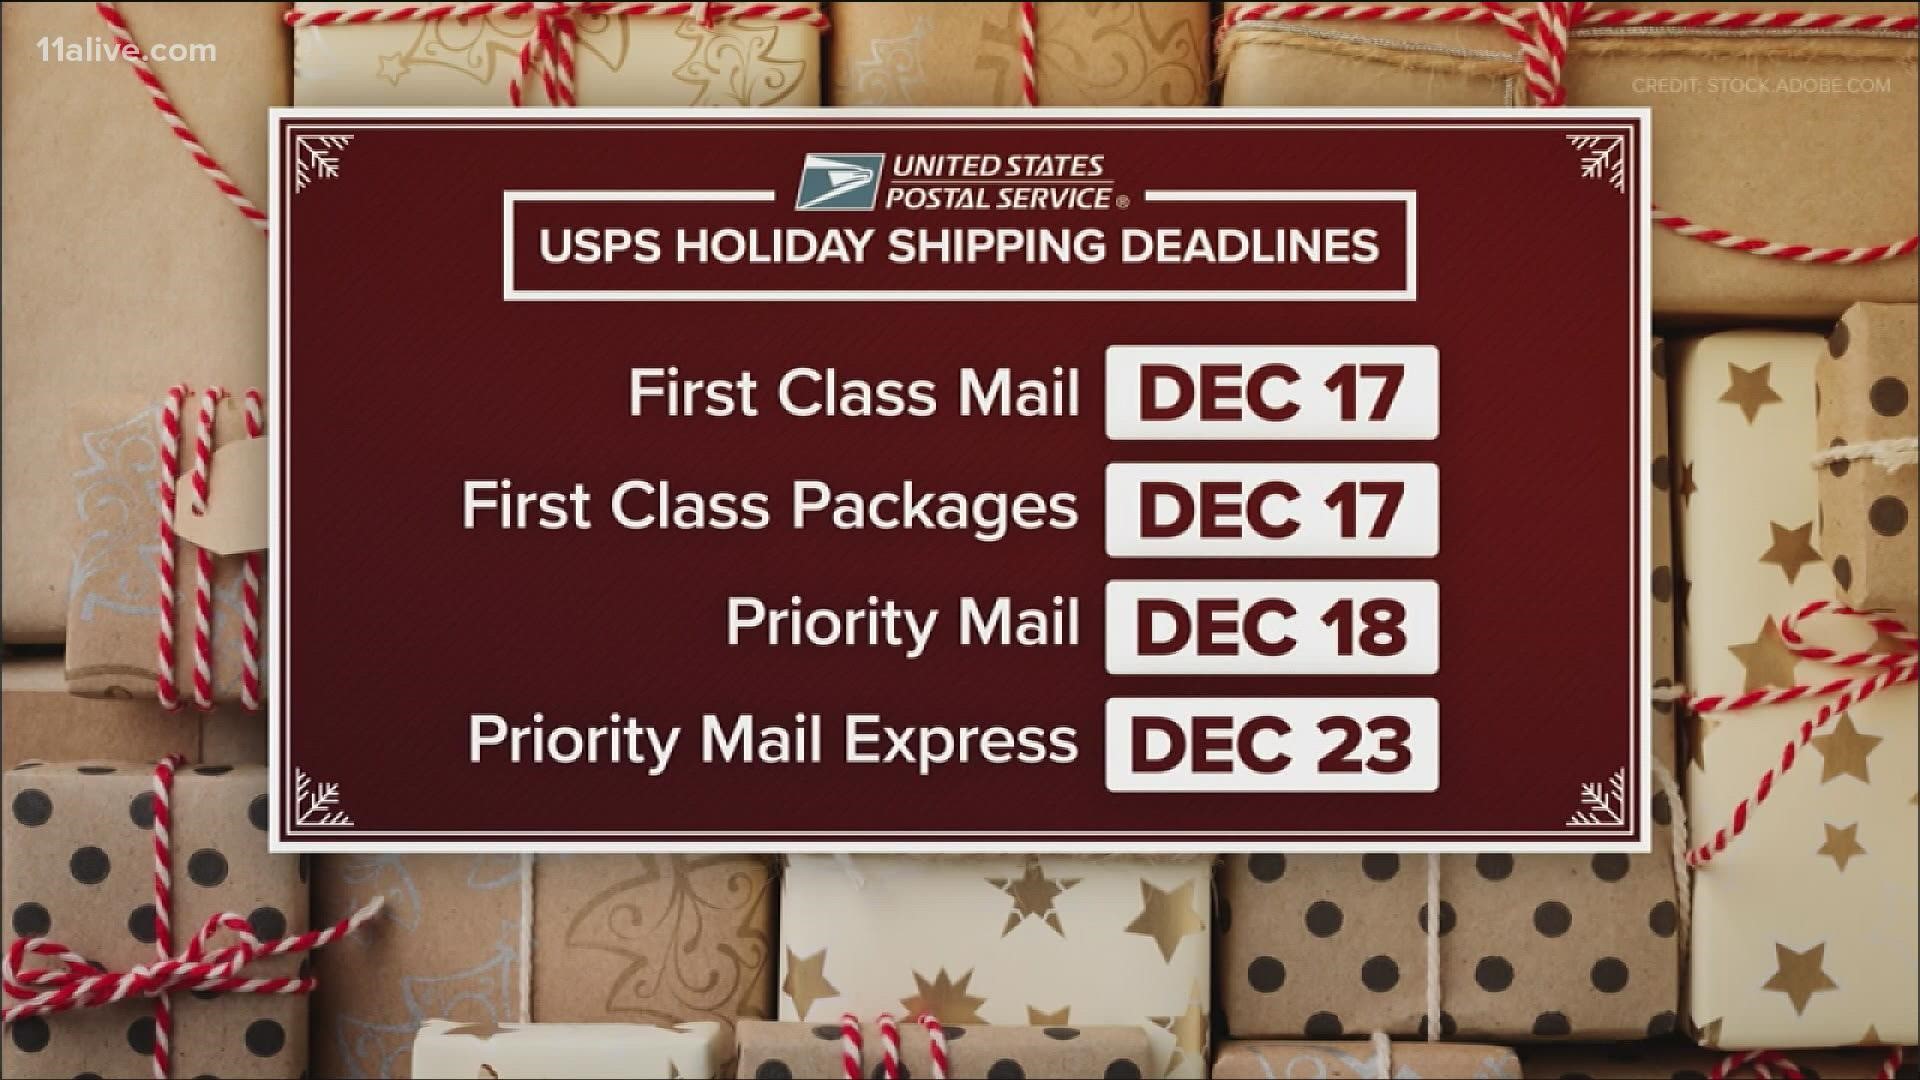 USPS, UPS, shipping deadlines What to know to beat holiday rush